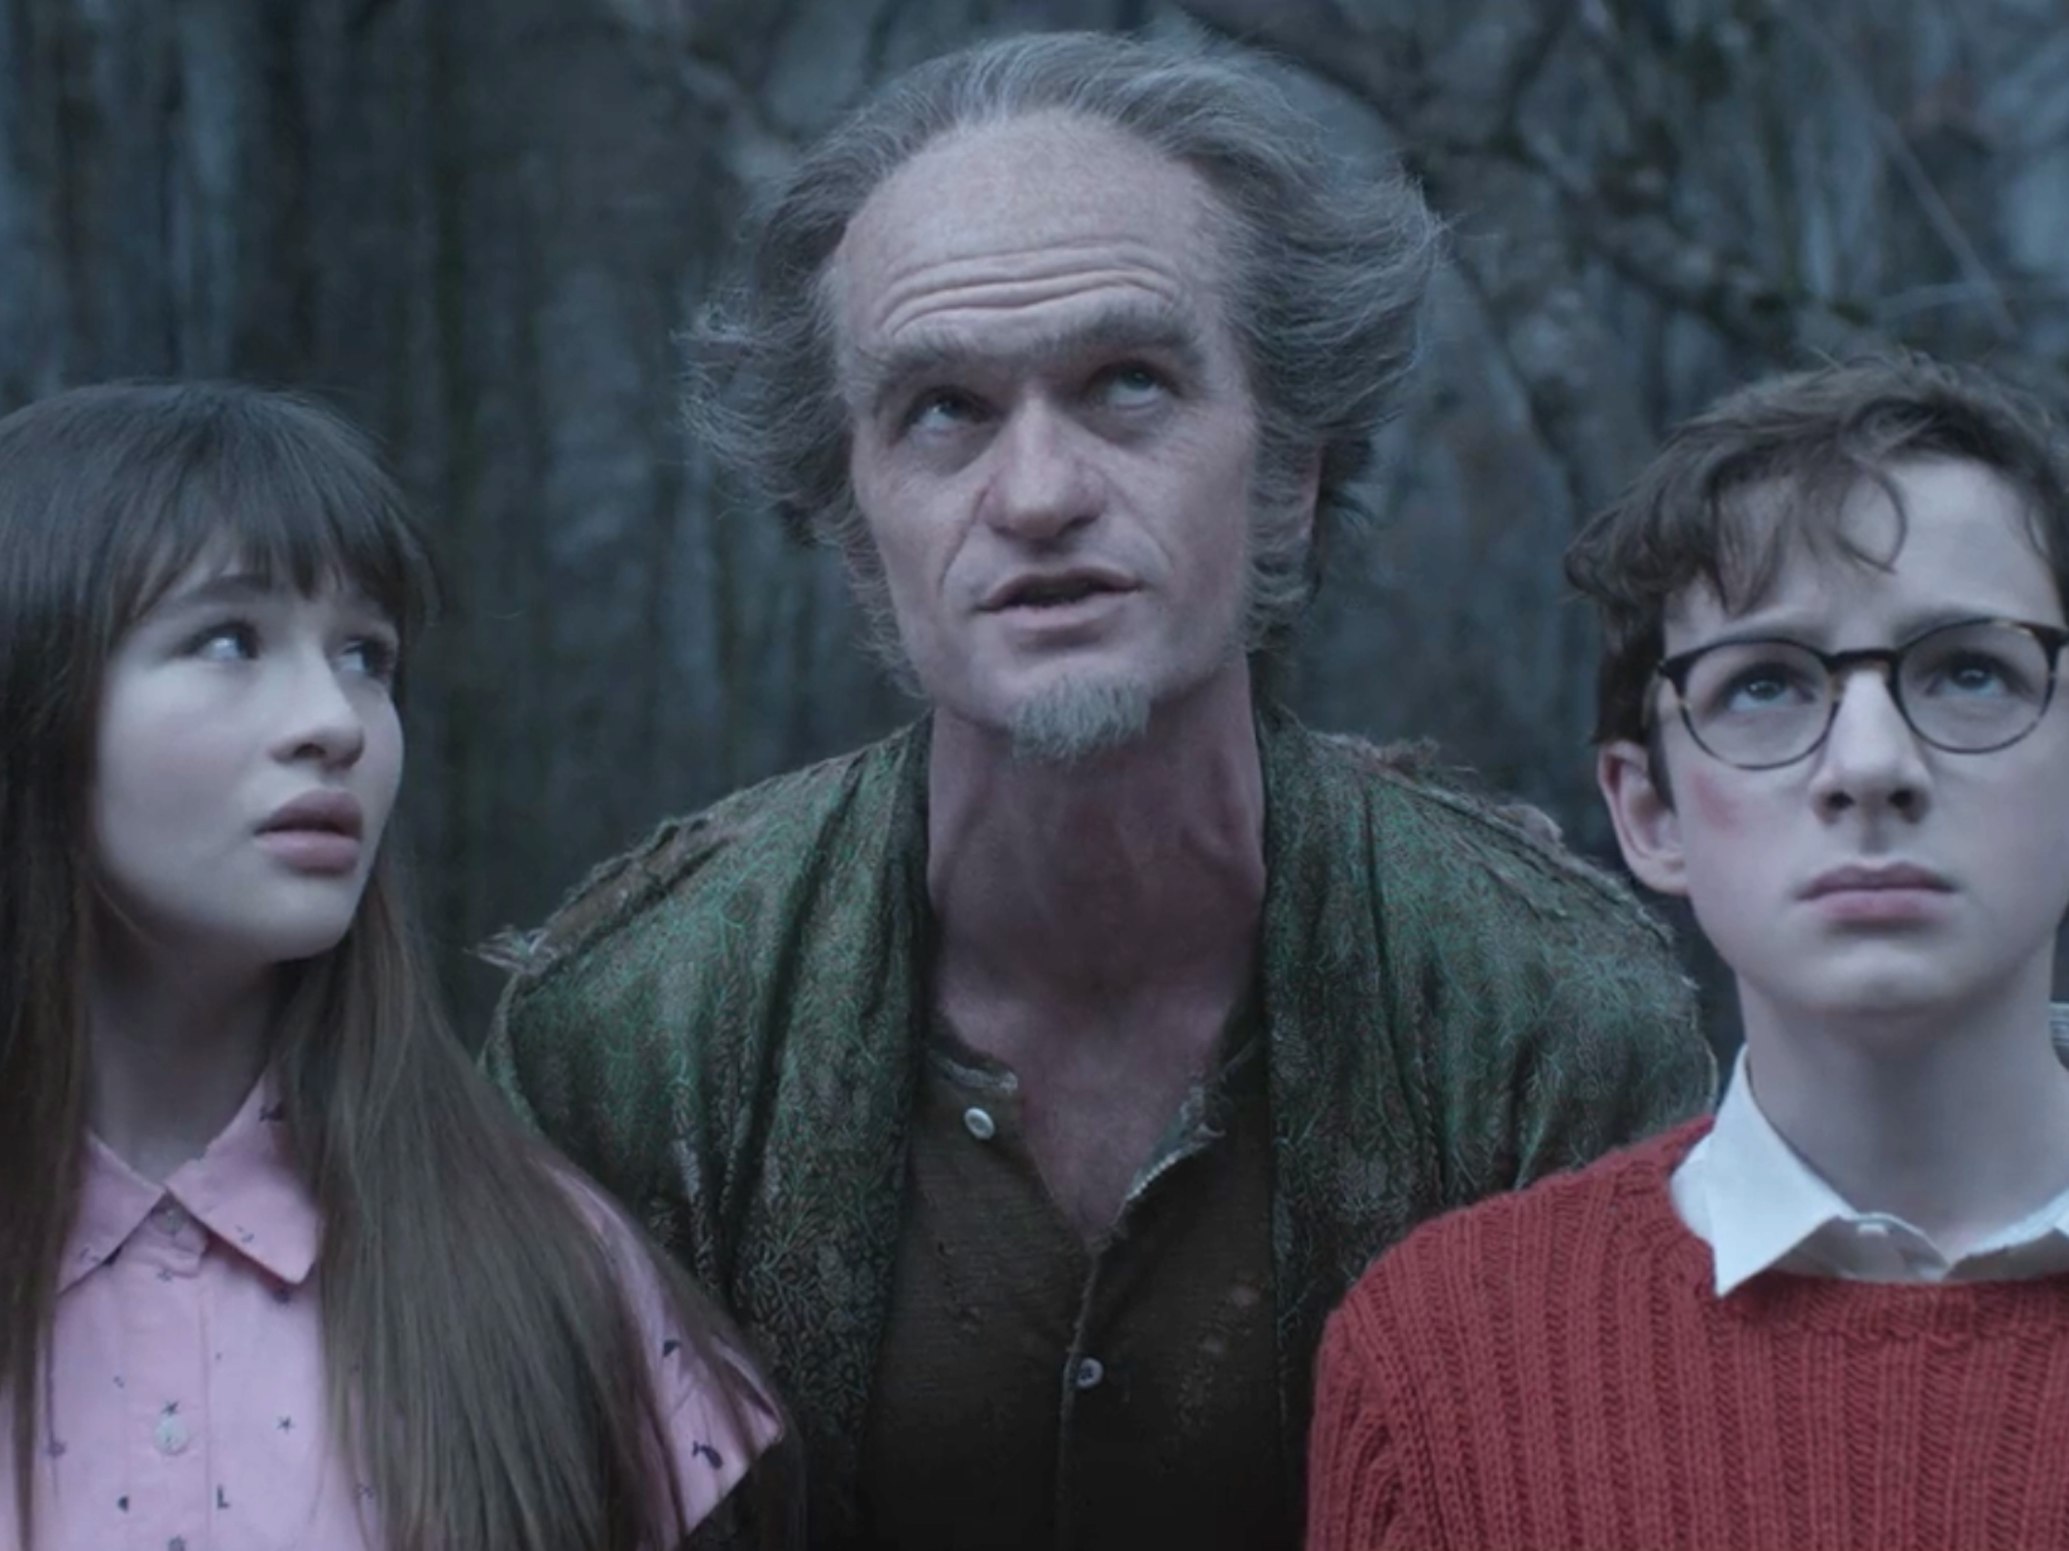 All the Unfortunate Events in Netflix's 'A Series of Unfortunate Events